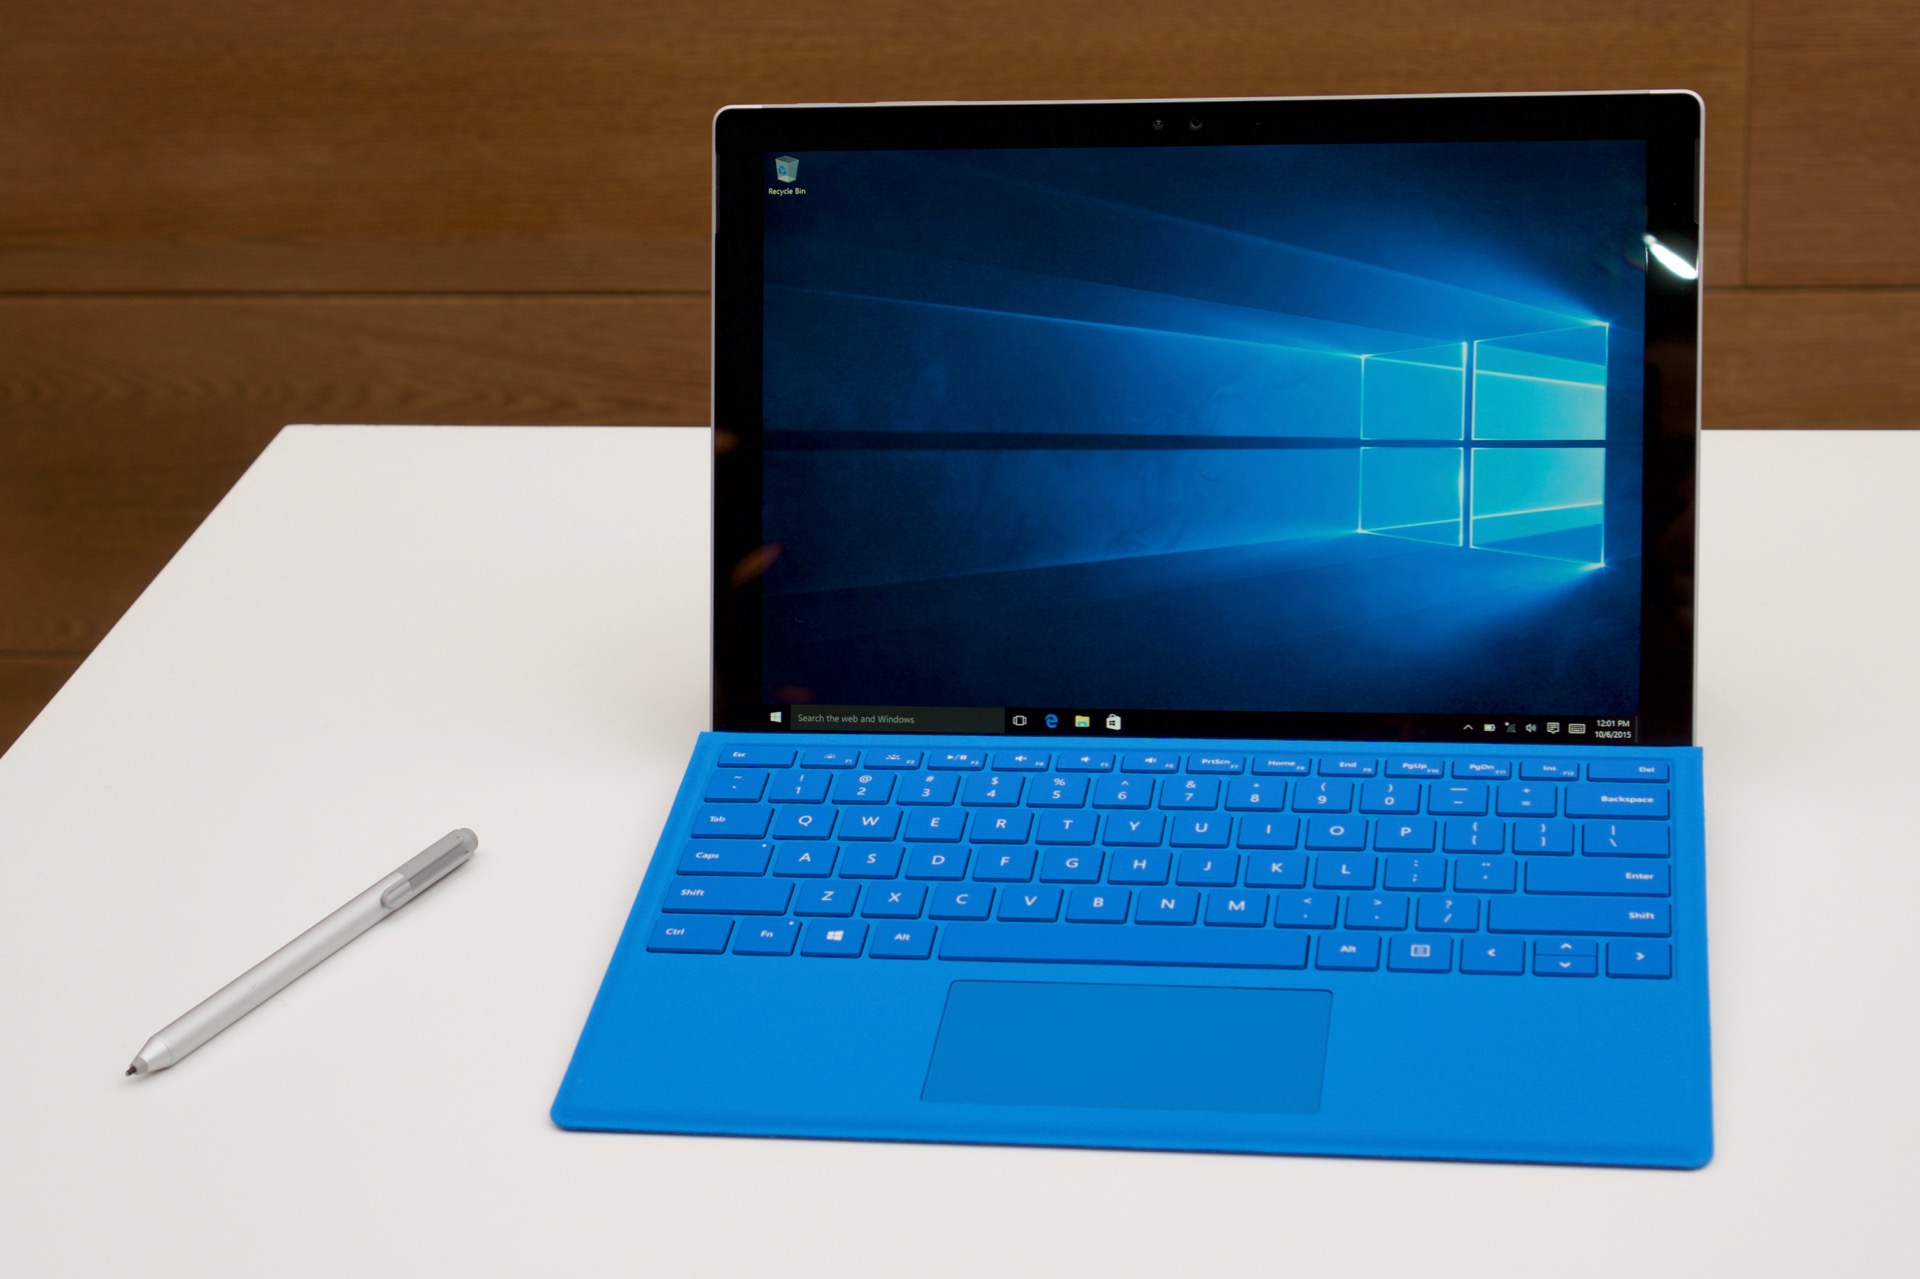 Hands-on: The Surface Pro 4 is a design that’s settled down | Ars Technica